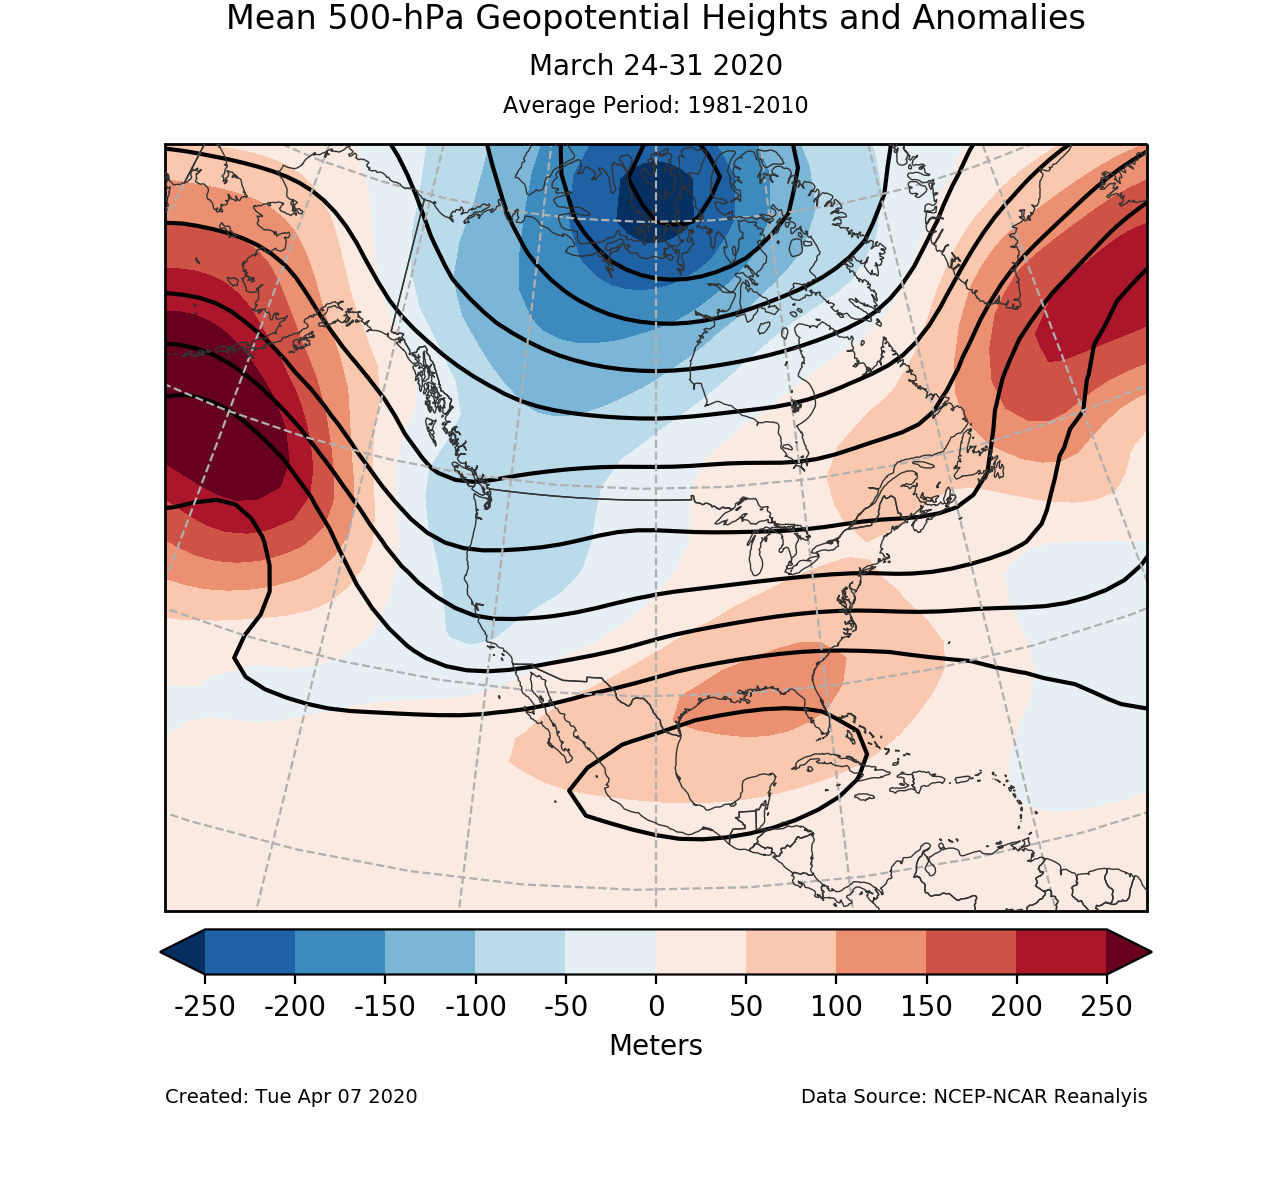 500-mb circulation anomalies for North America for March 24-31 2020